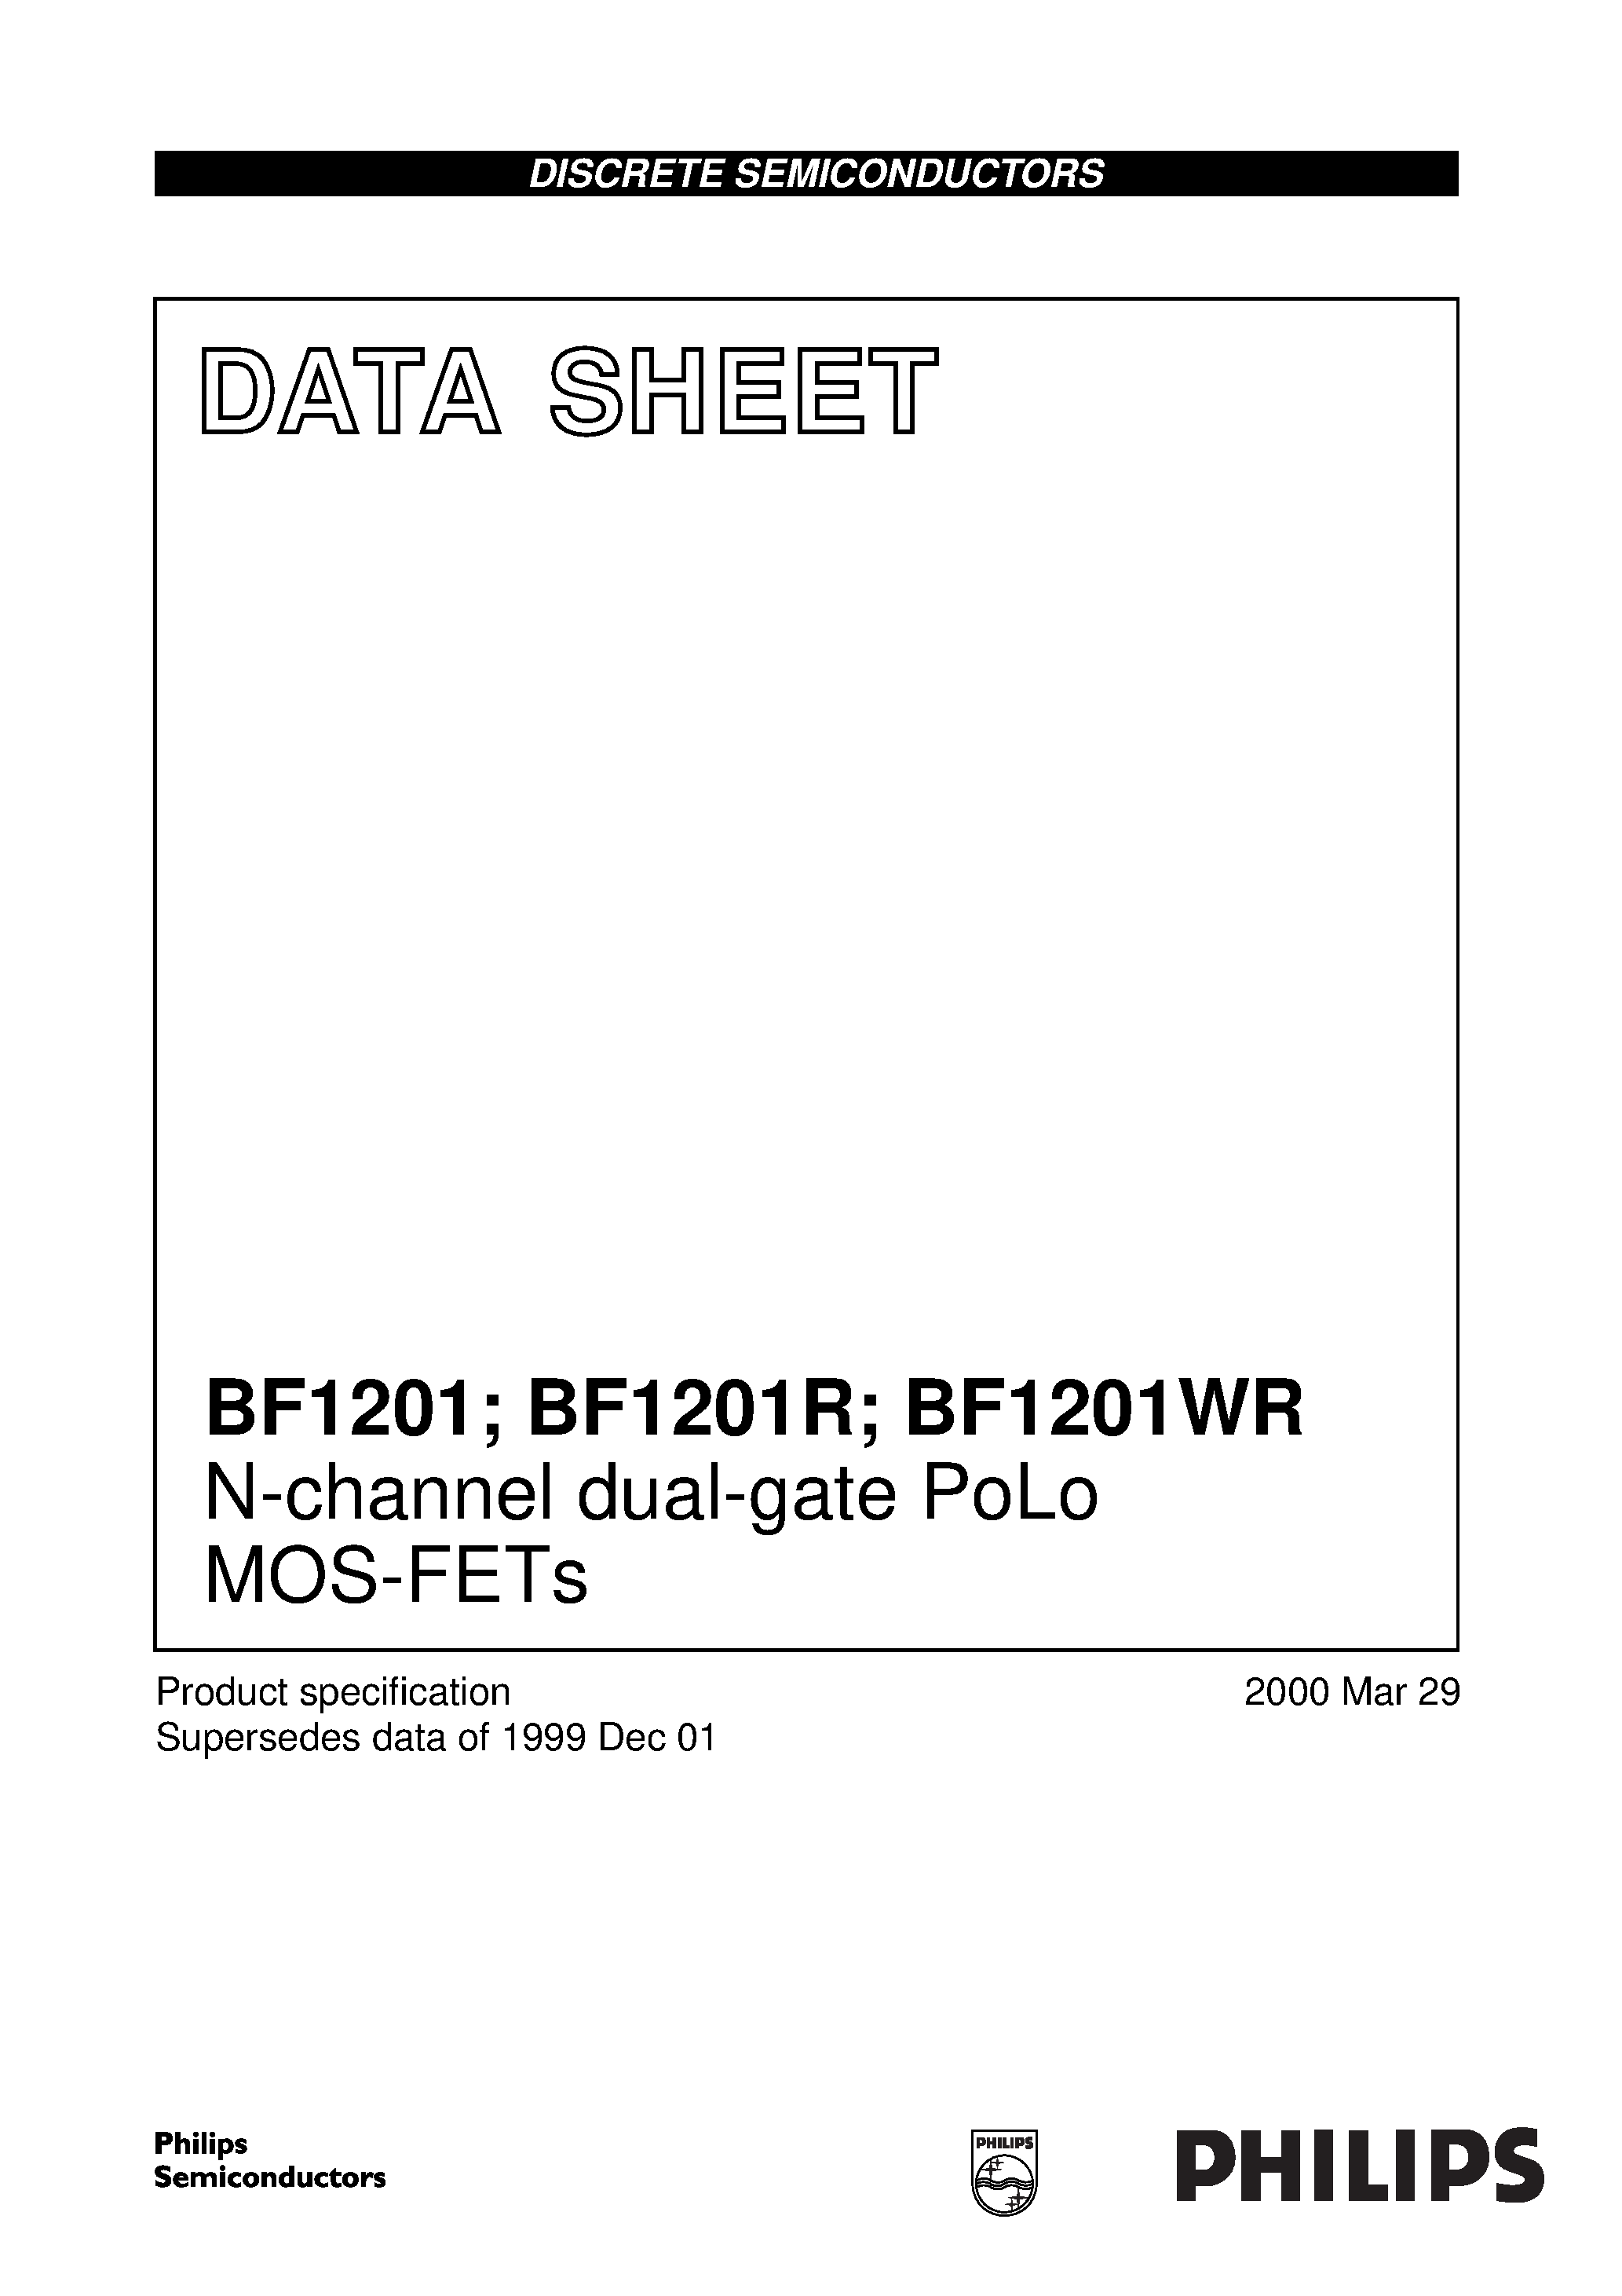 Datasheet BF1201WR - N-channel dual-gate PoLo MOS-FETs page 1